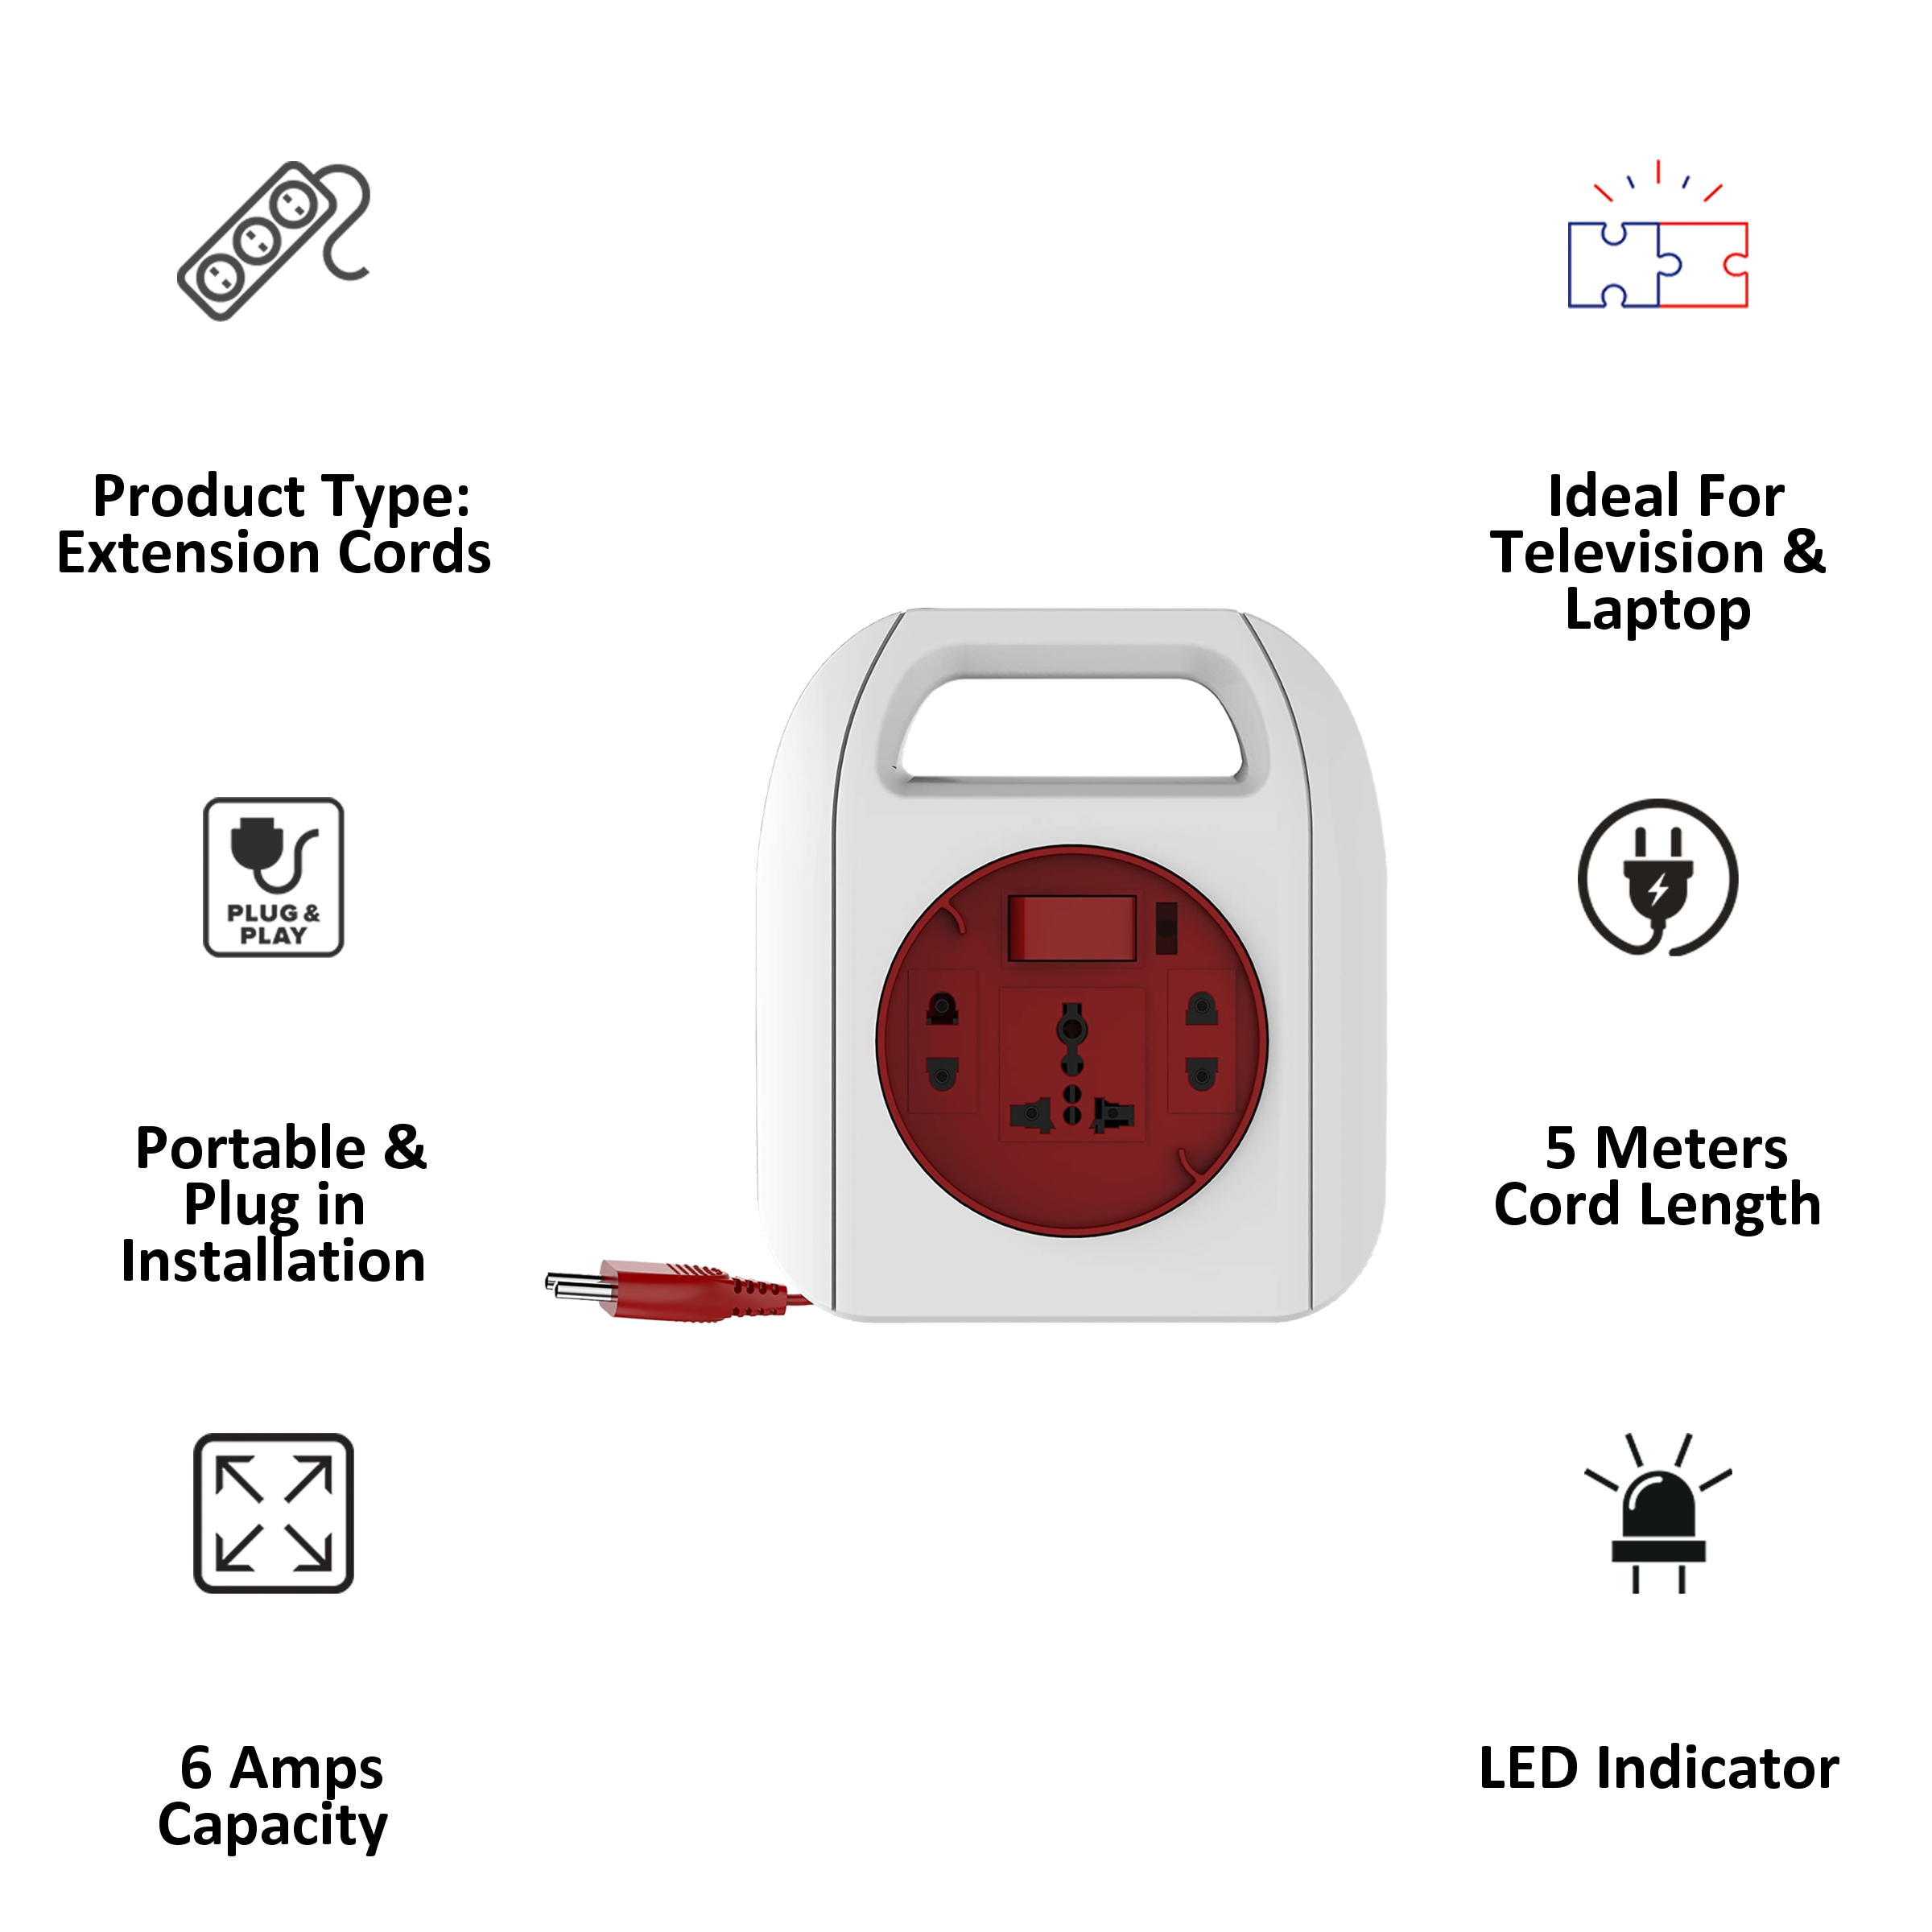 Goldmedal Sliq 6 Amp 3 Sockets Extension Board  (5 Meters, LED Indicator, 205116, White/Red)_4